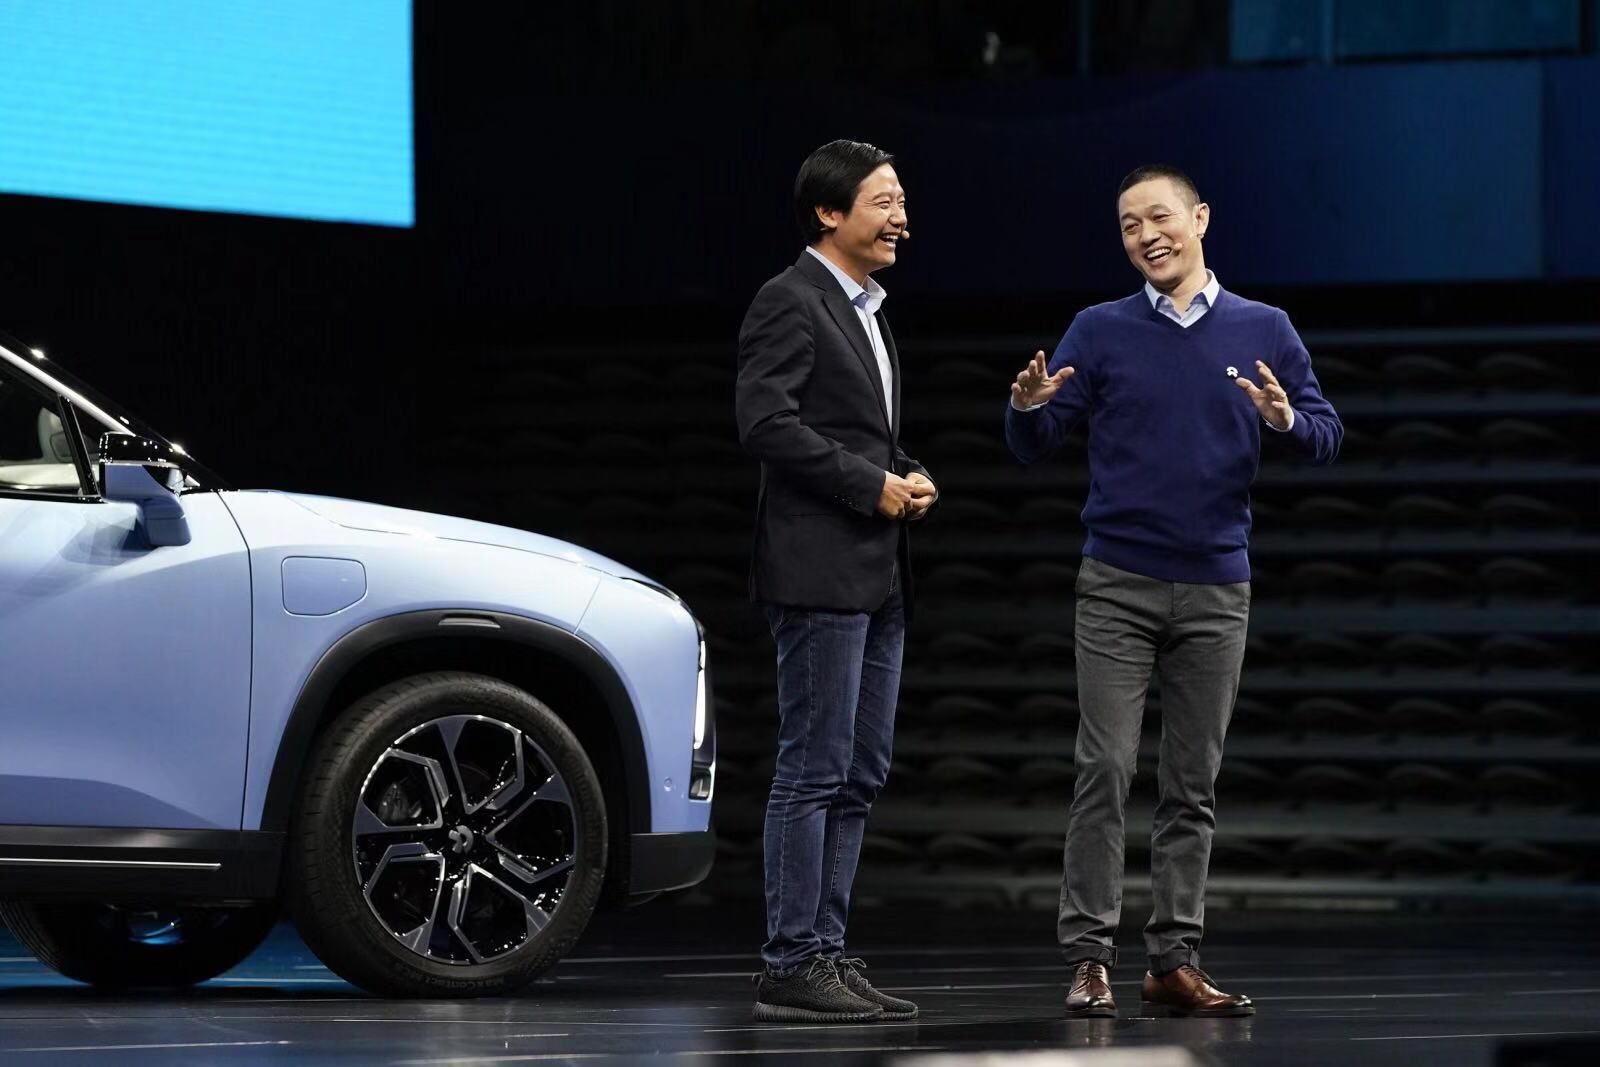 BREAKING: Xiaomi confirms launch of electric car business, to invest $10 billion over next decade-CnEVPost